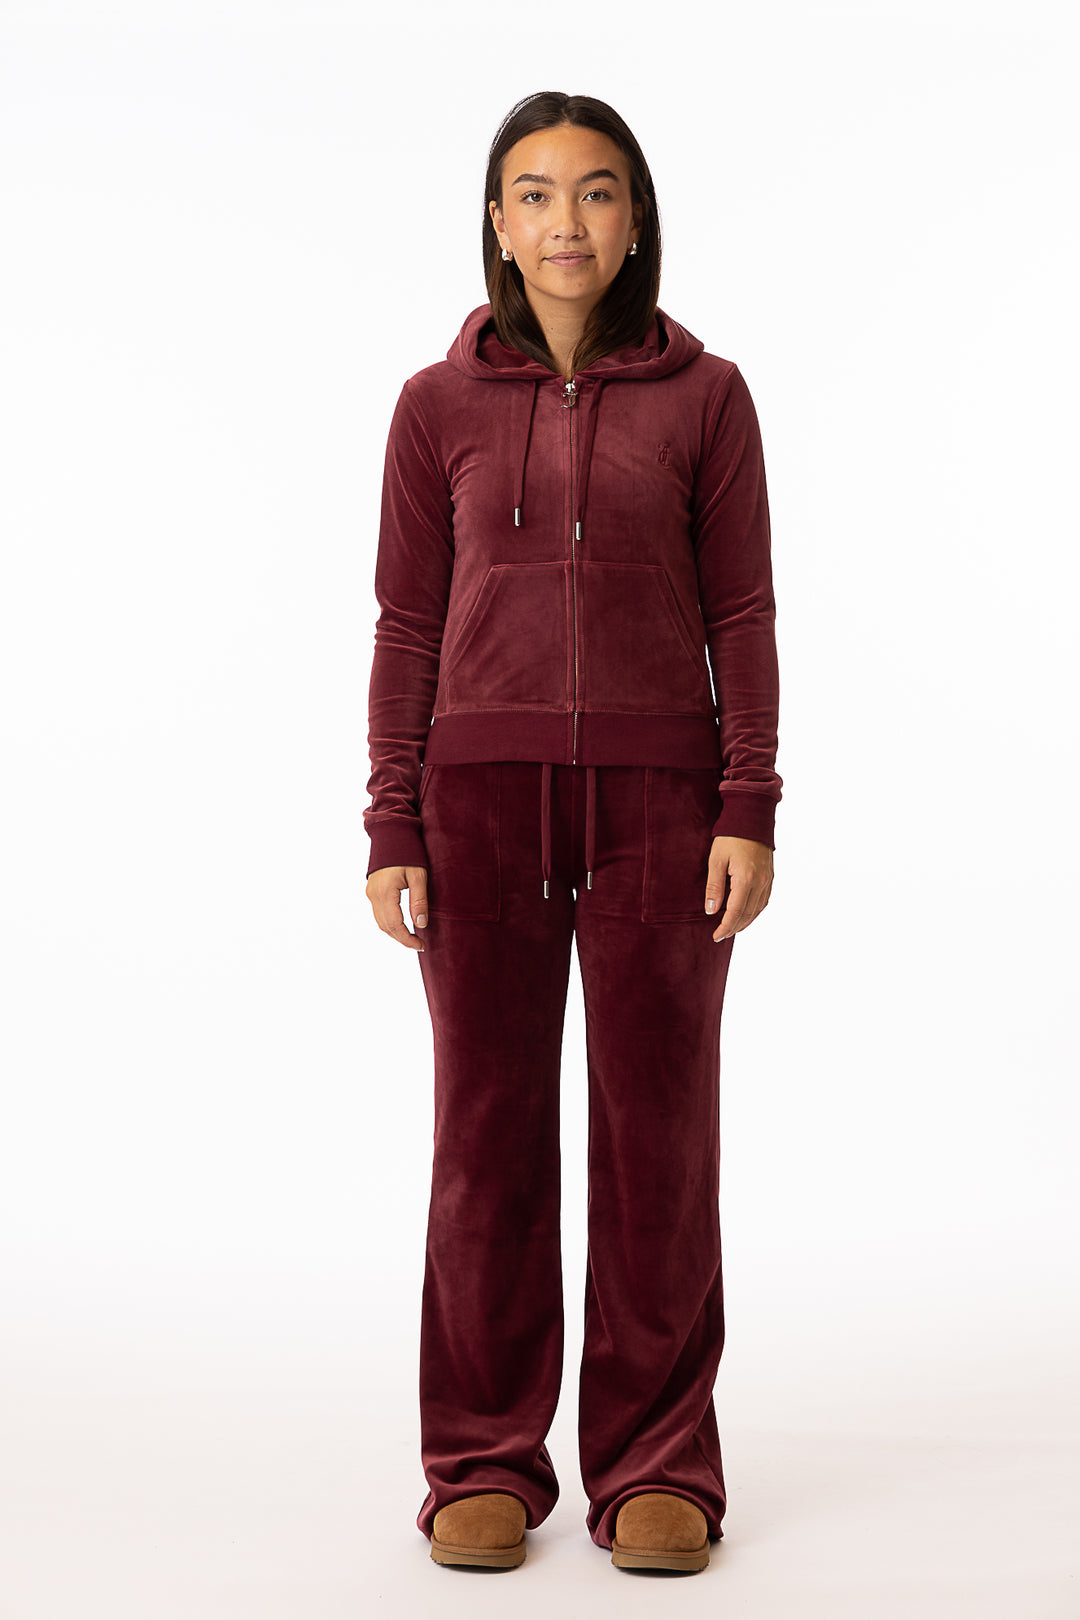 Layla Low Rise Flare Pocketed- Tawny port